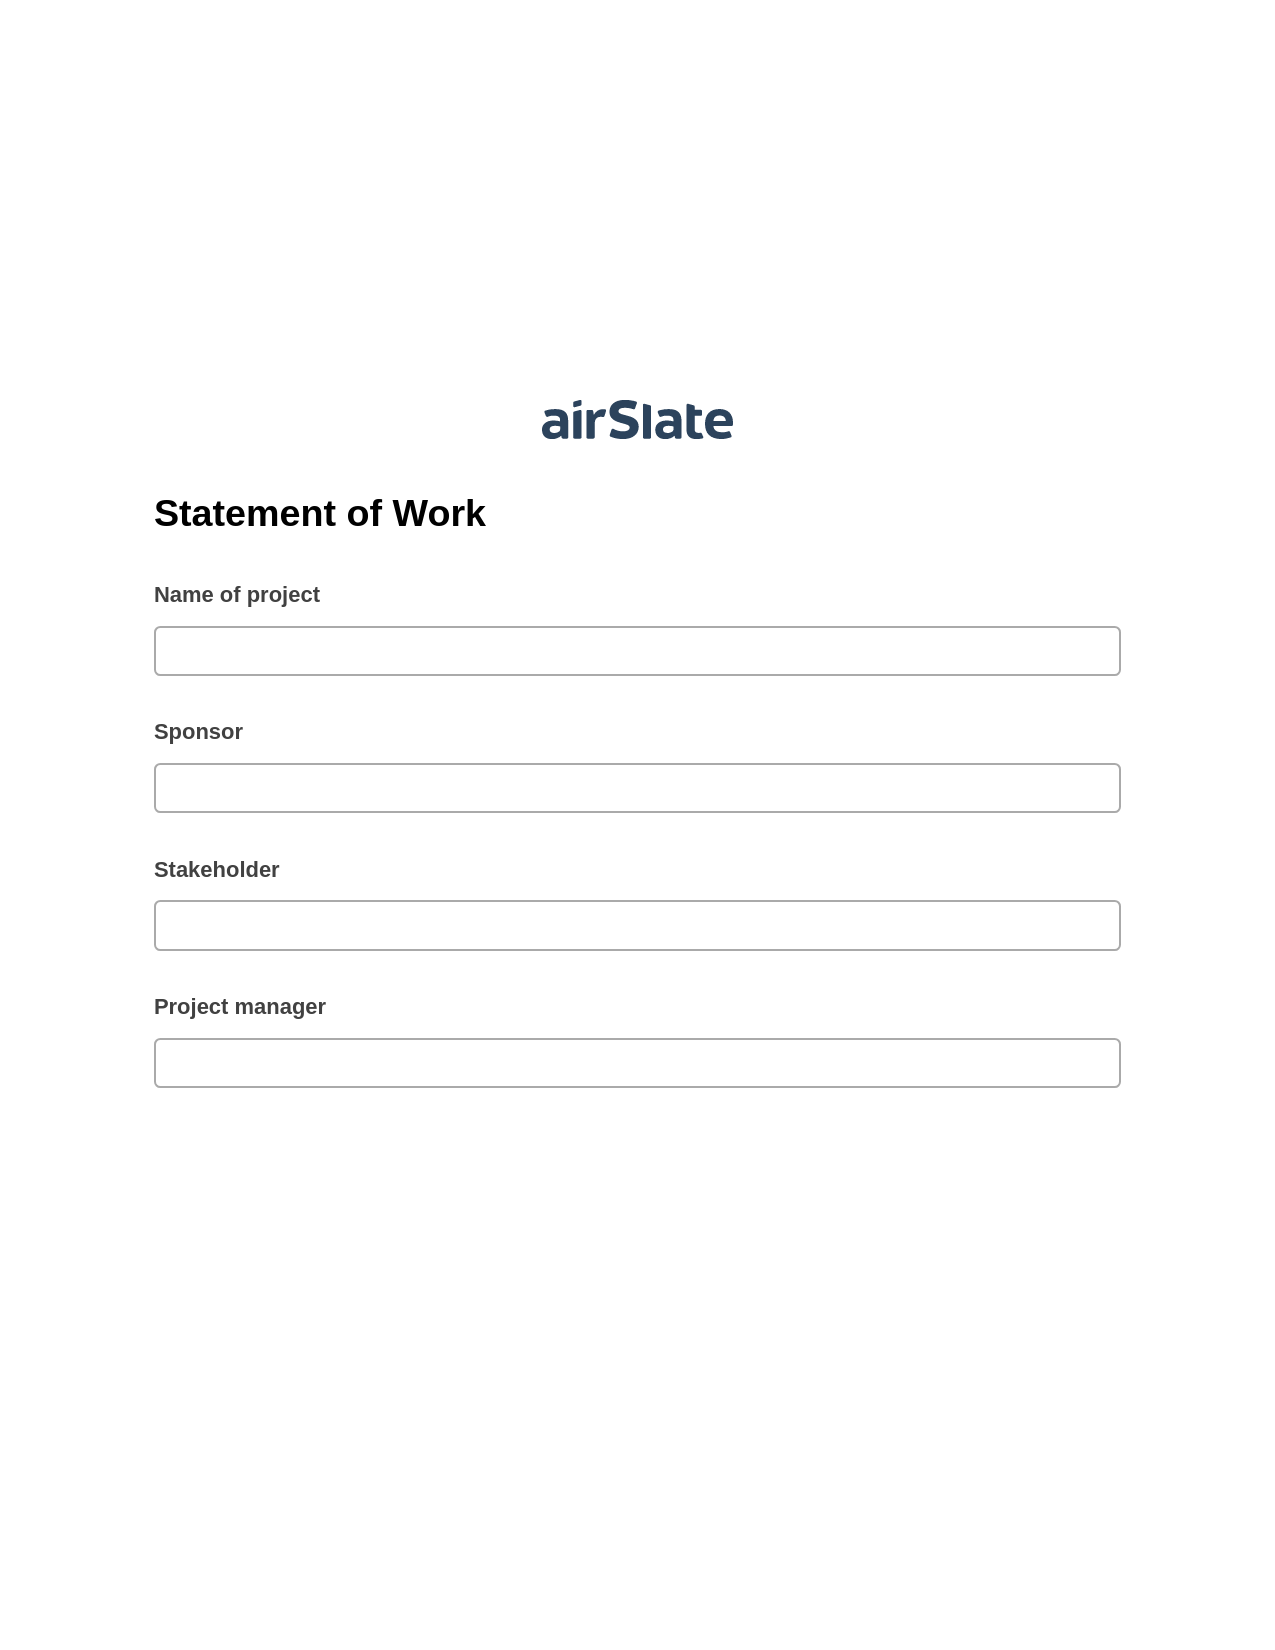 Statement of Work Pre-fill from Excel Spreadsheet Dropdown Options Bot, Remove Tags From Slate Bot, Google Drive Bot